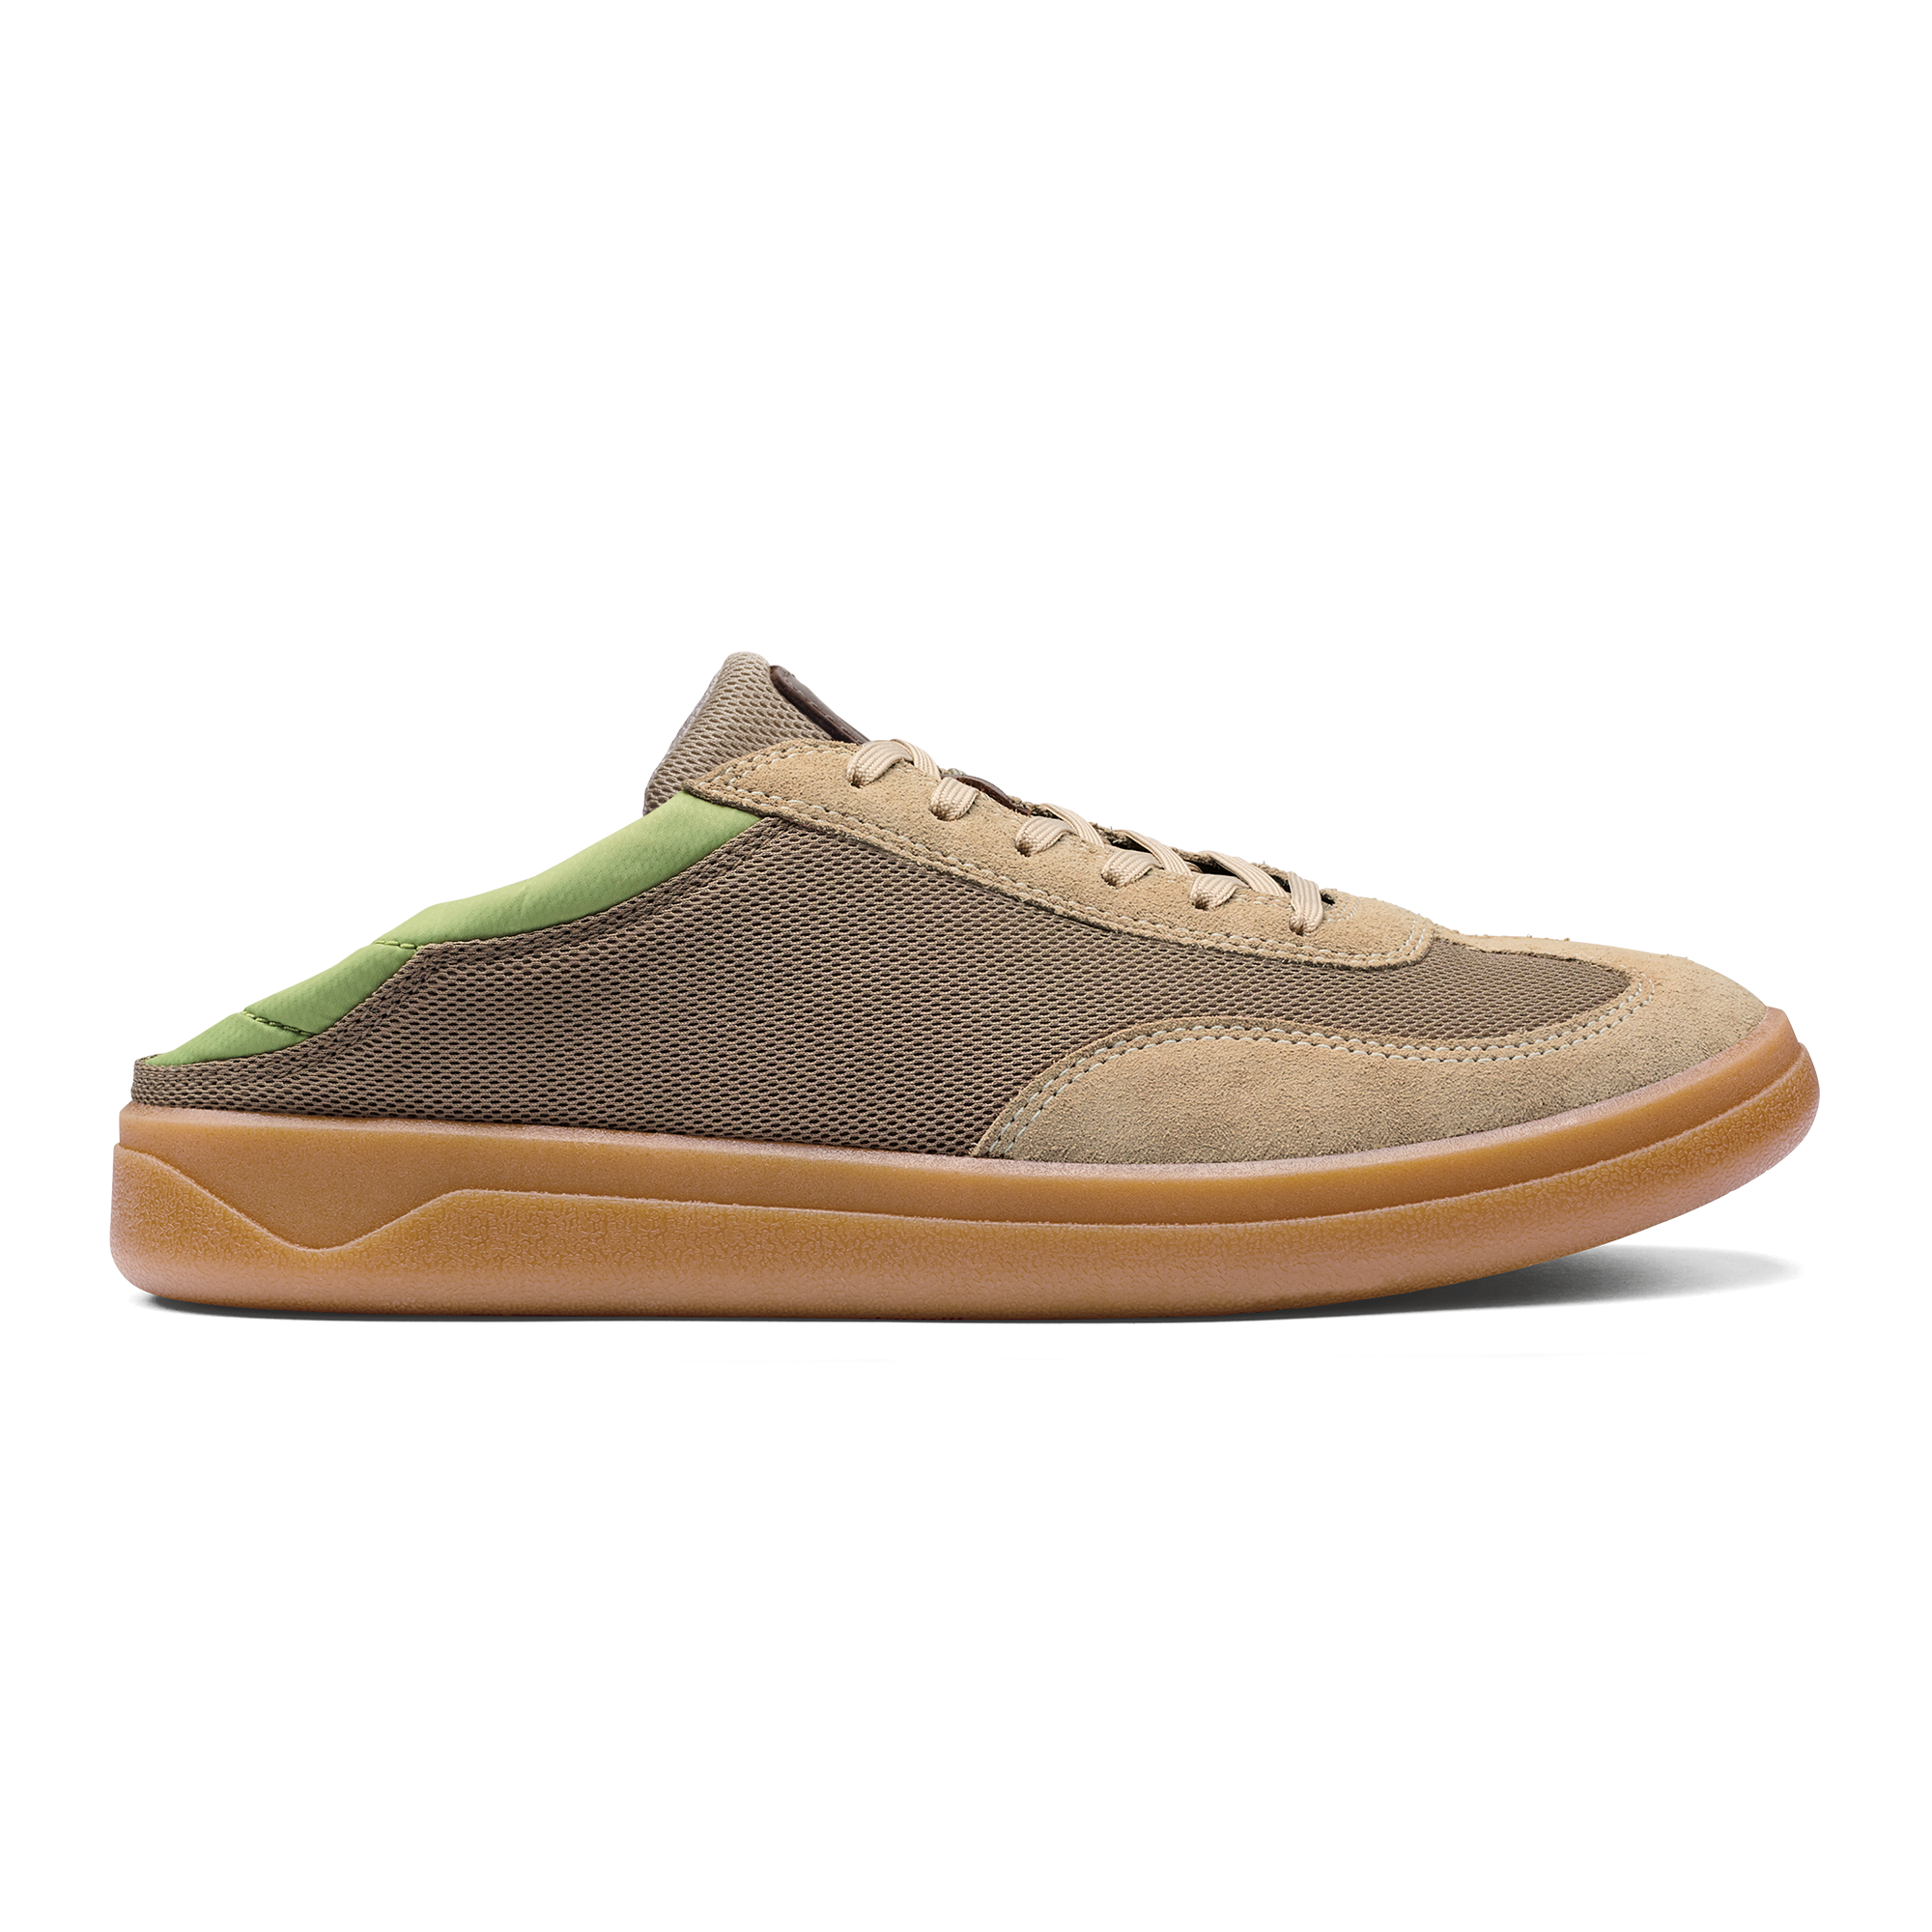 Clay leather low-top sneakers